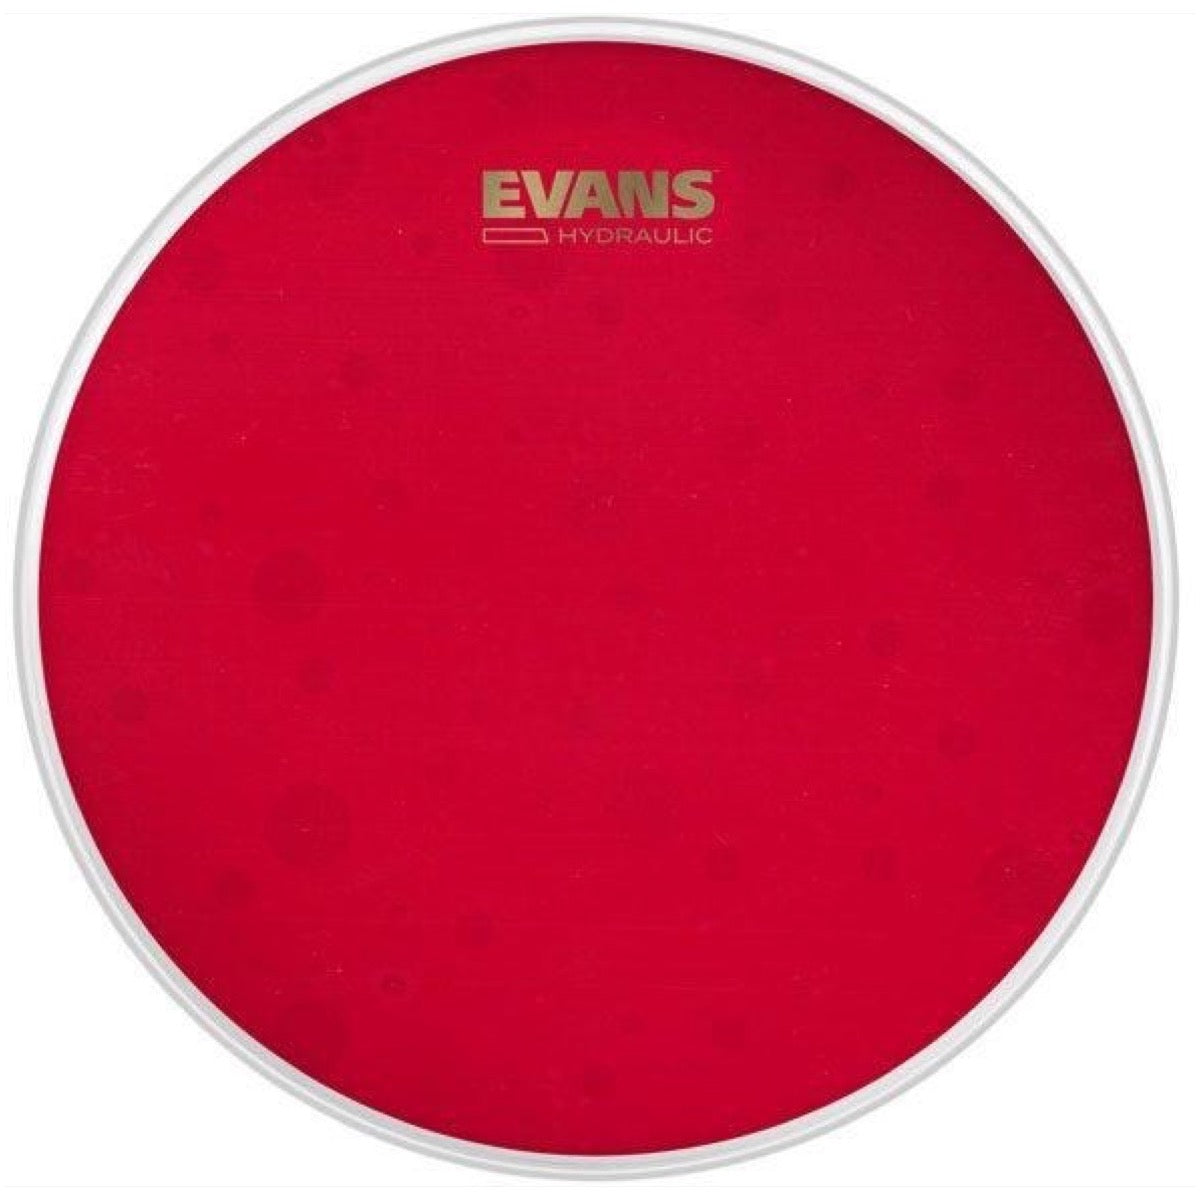 Evans Red Hydraulic Coated Snare Drumhead, 14 Inch